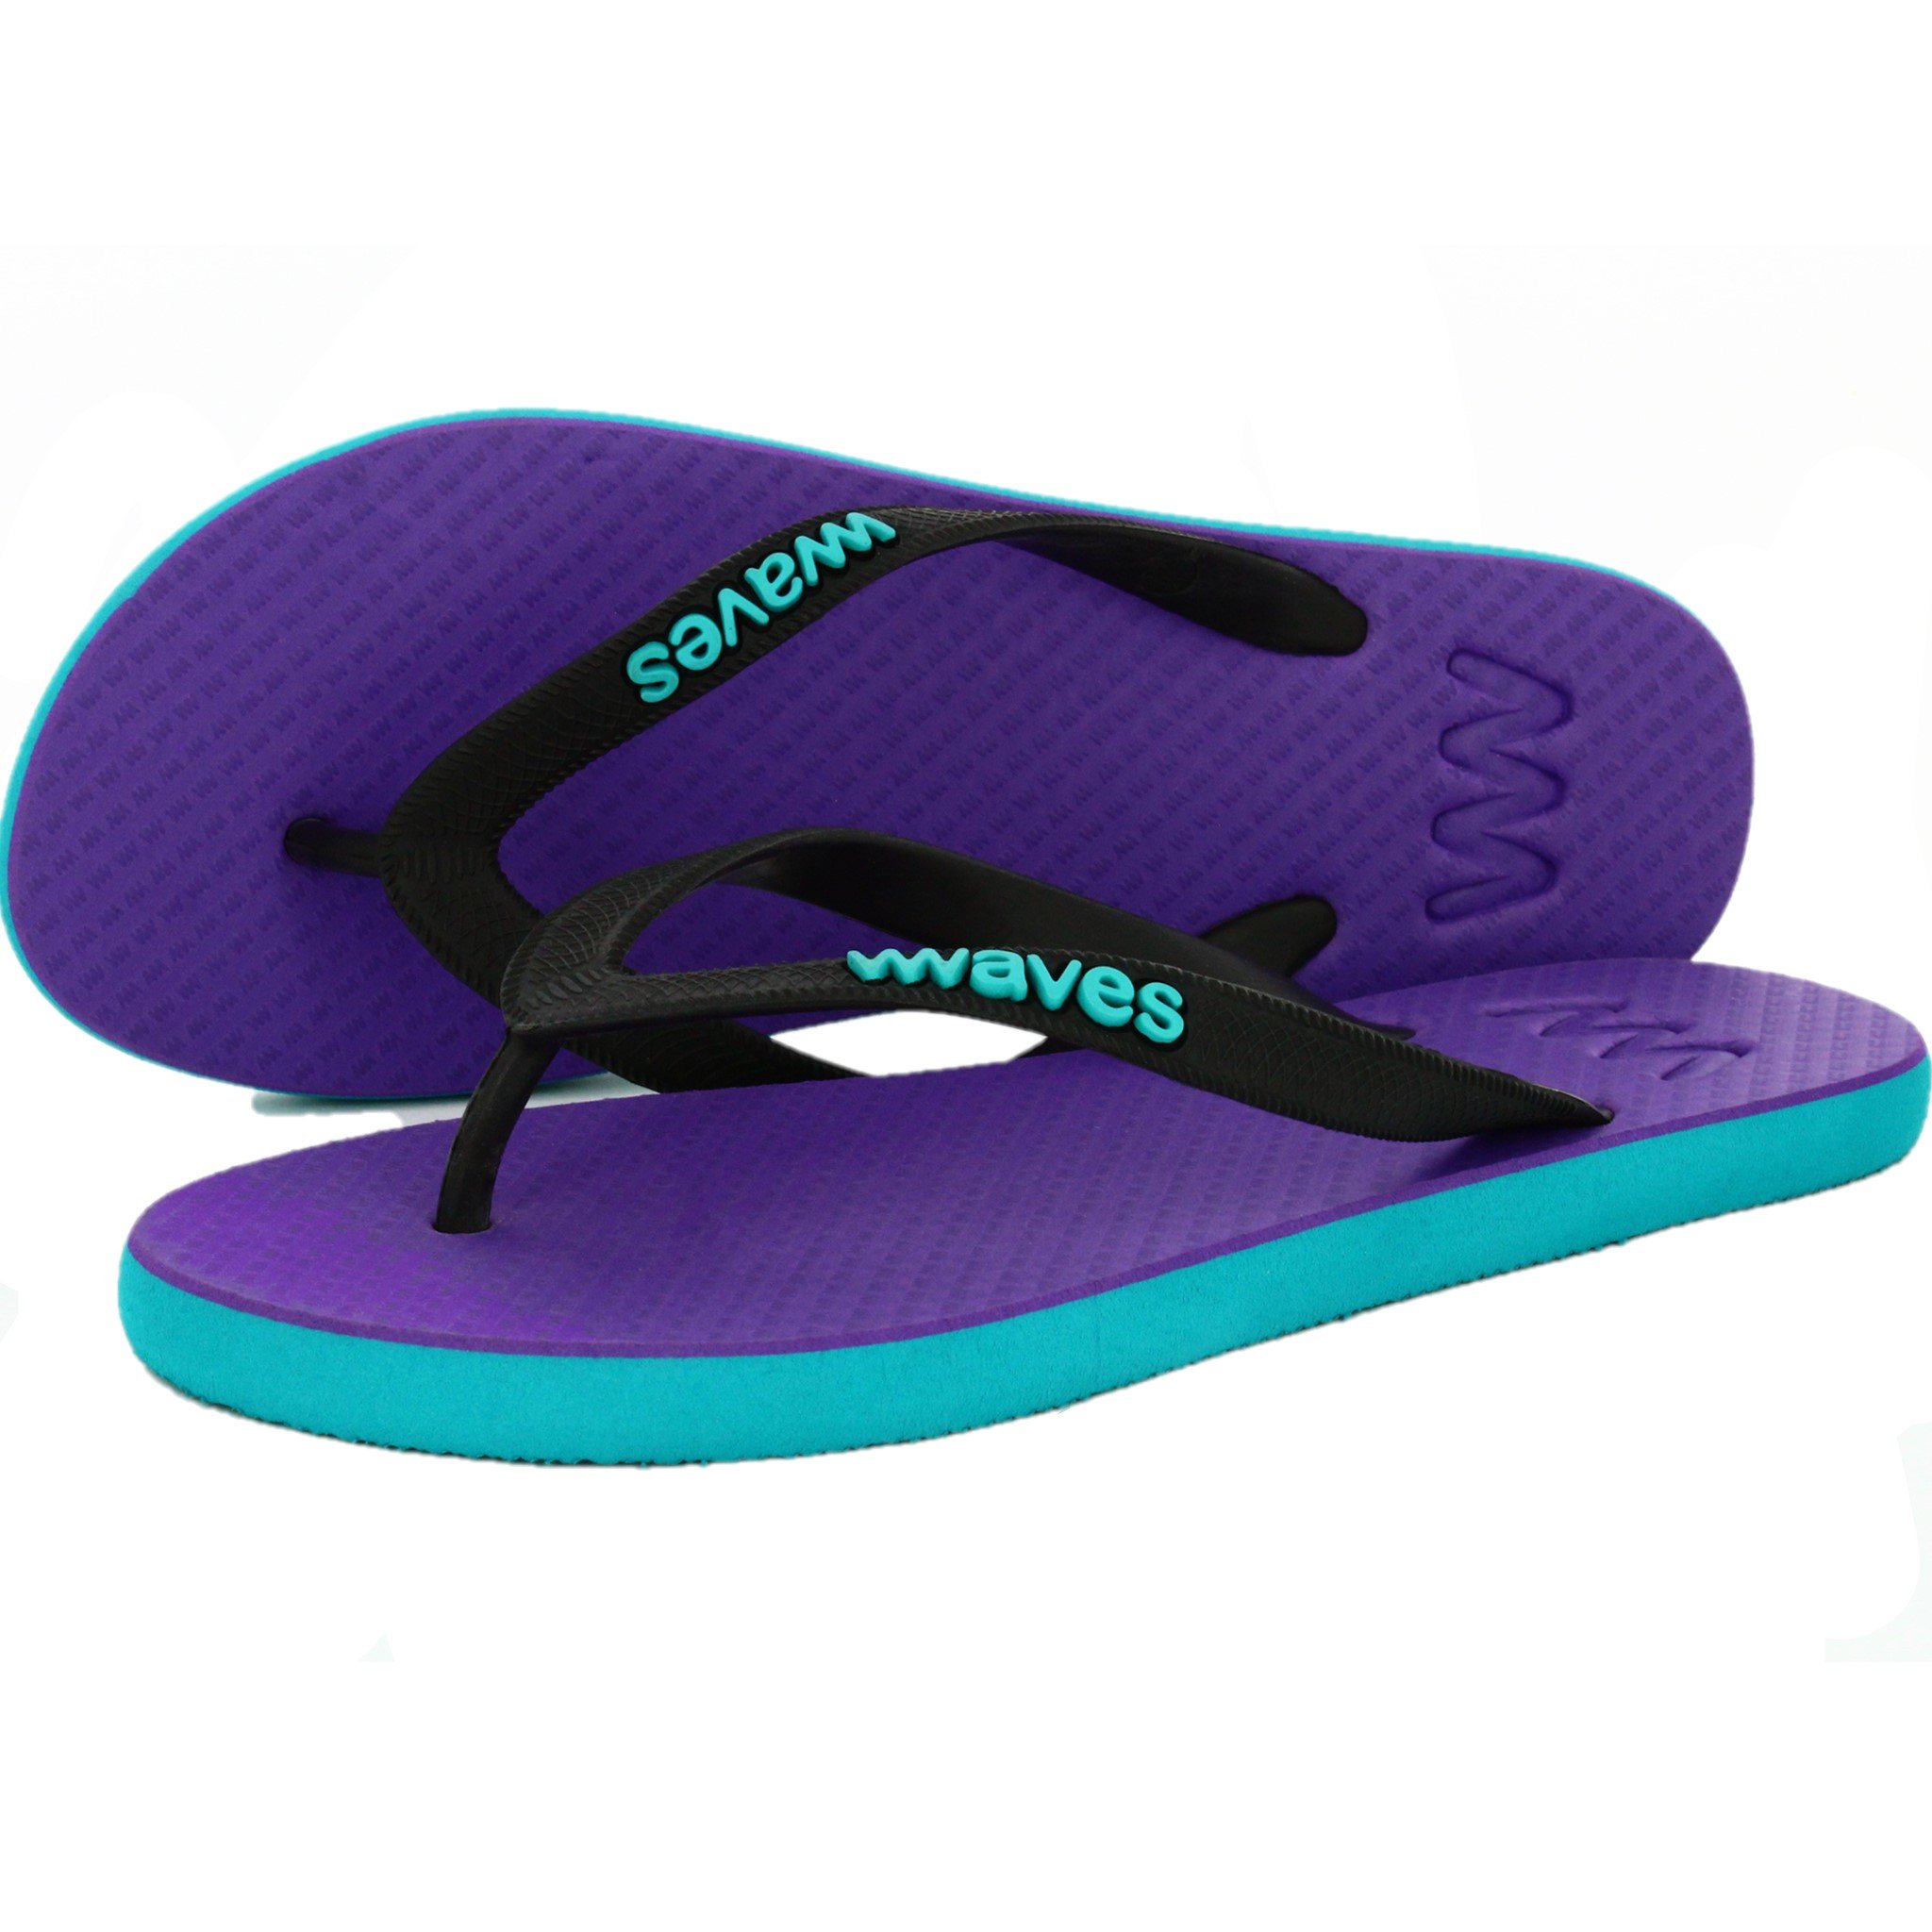 100% natural rubber flip flop – purple and blue two tone - 3